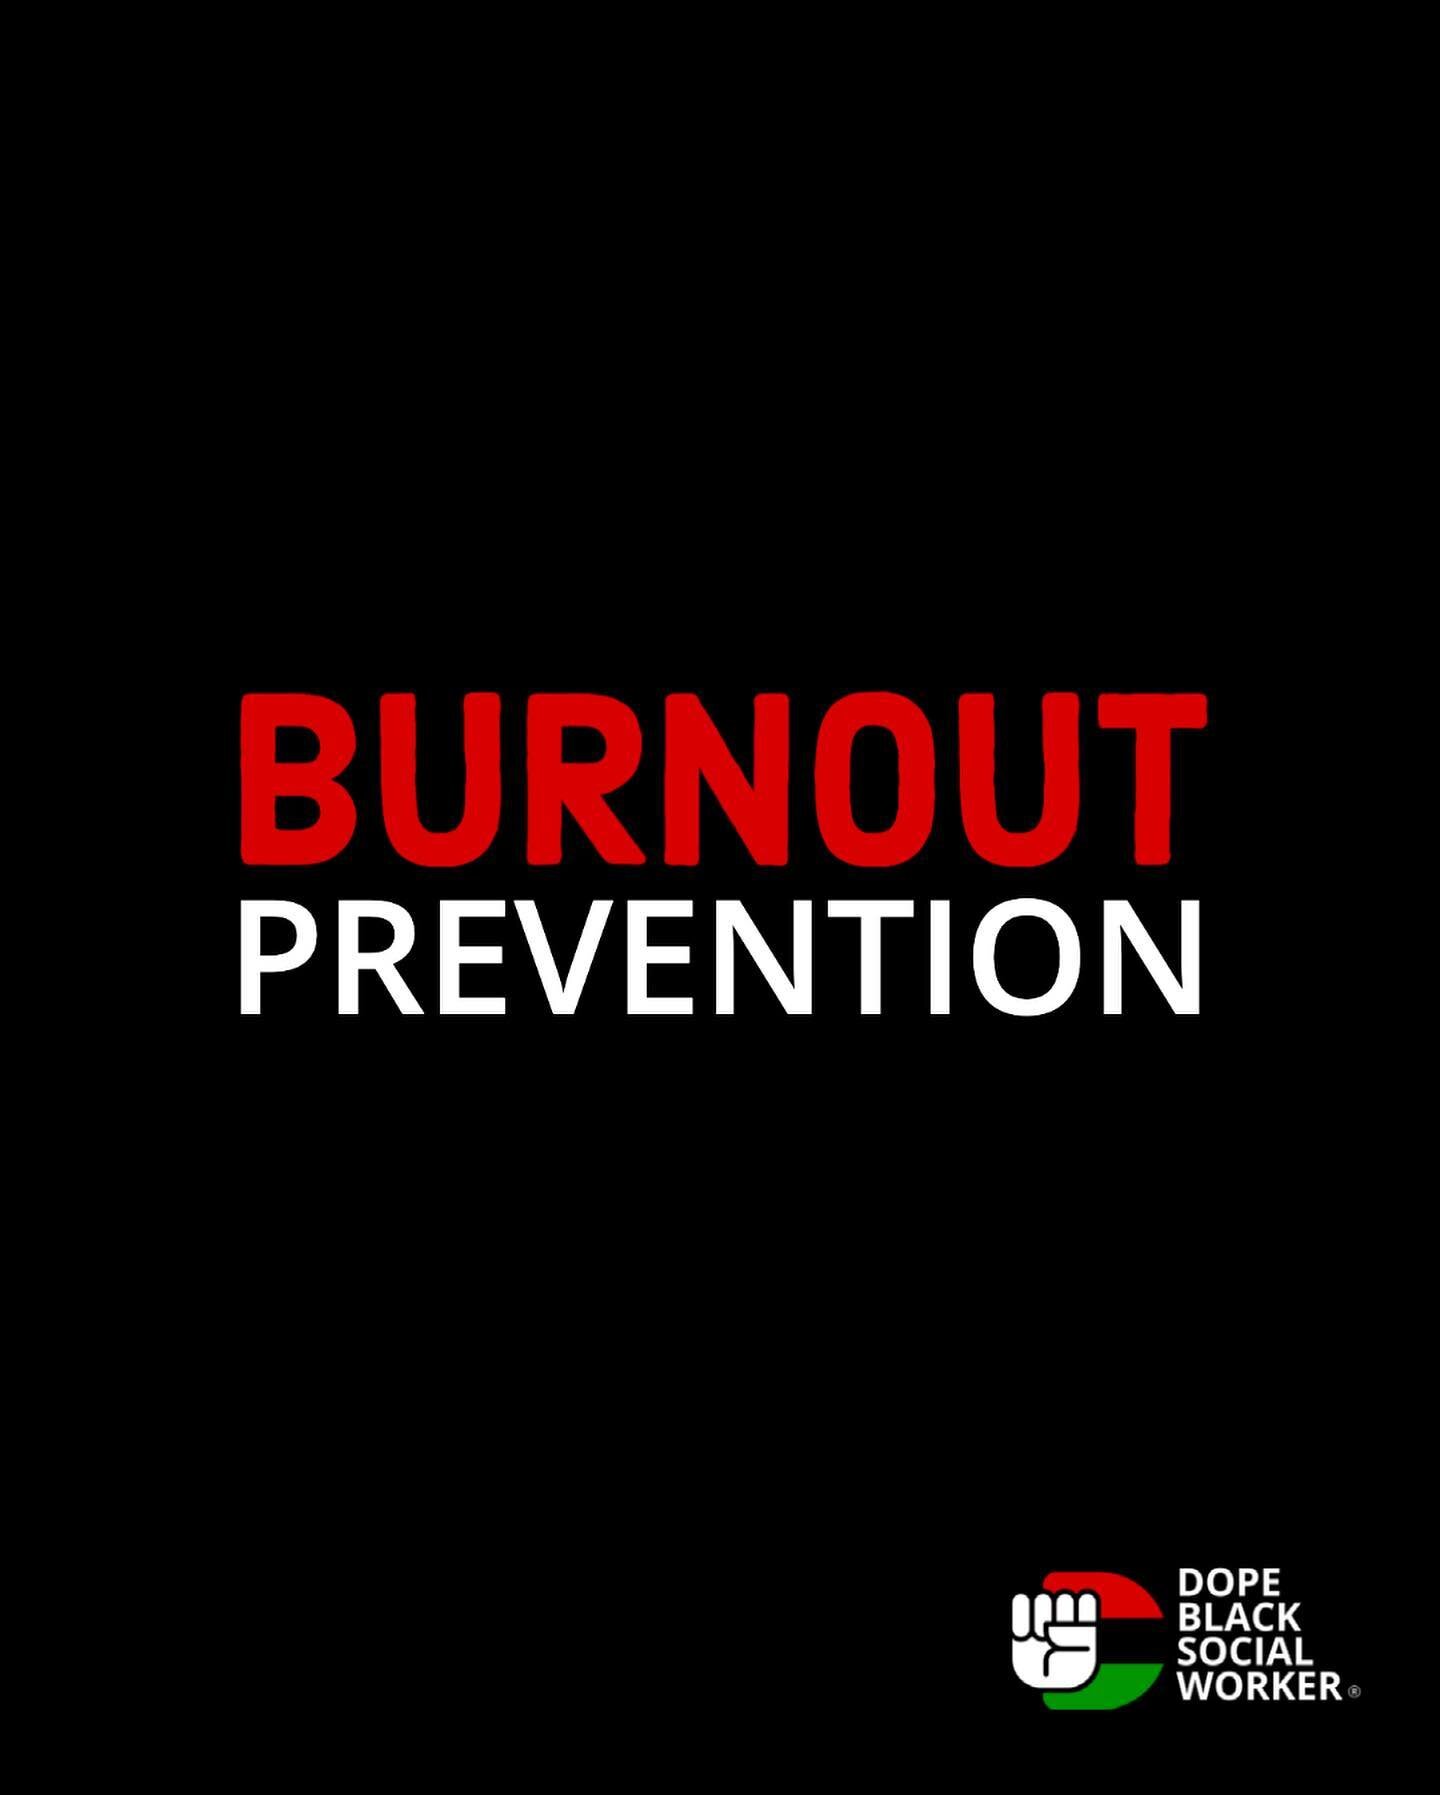 Social Work Month Day 27

I do not subscribe to the dominant burnout narrative nor do I believe that &ldquo;burnout prevention&rdquo; is the primary responsibility of the individual. A burnout narrative that does not include the reoccurring harm crea